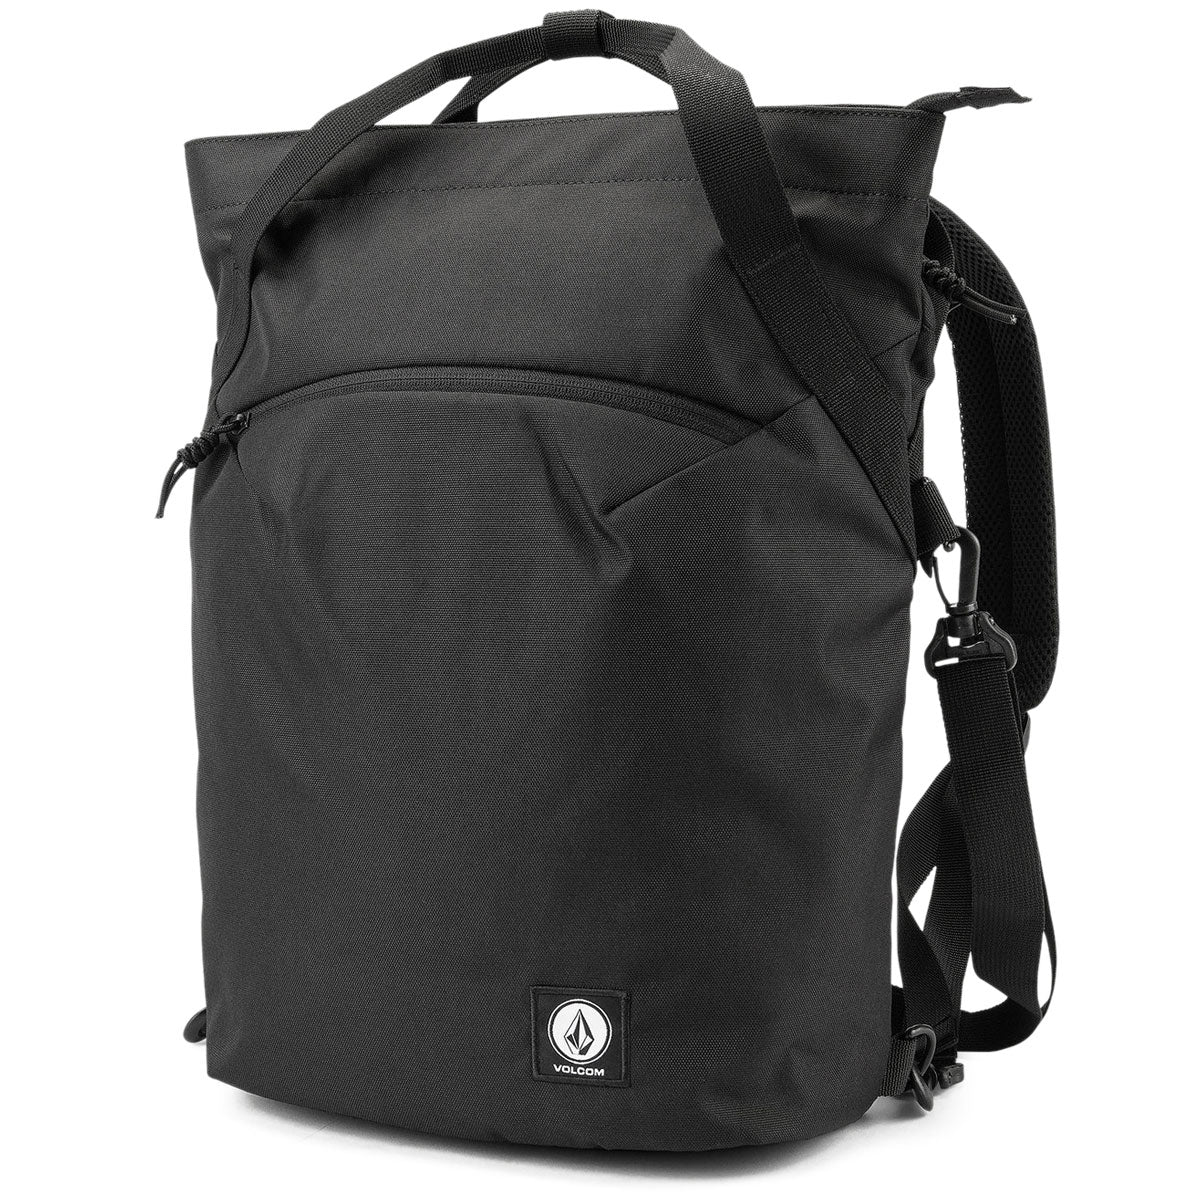 Volcom Day Trip Poly Backpack - Black image 1